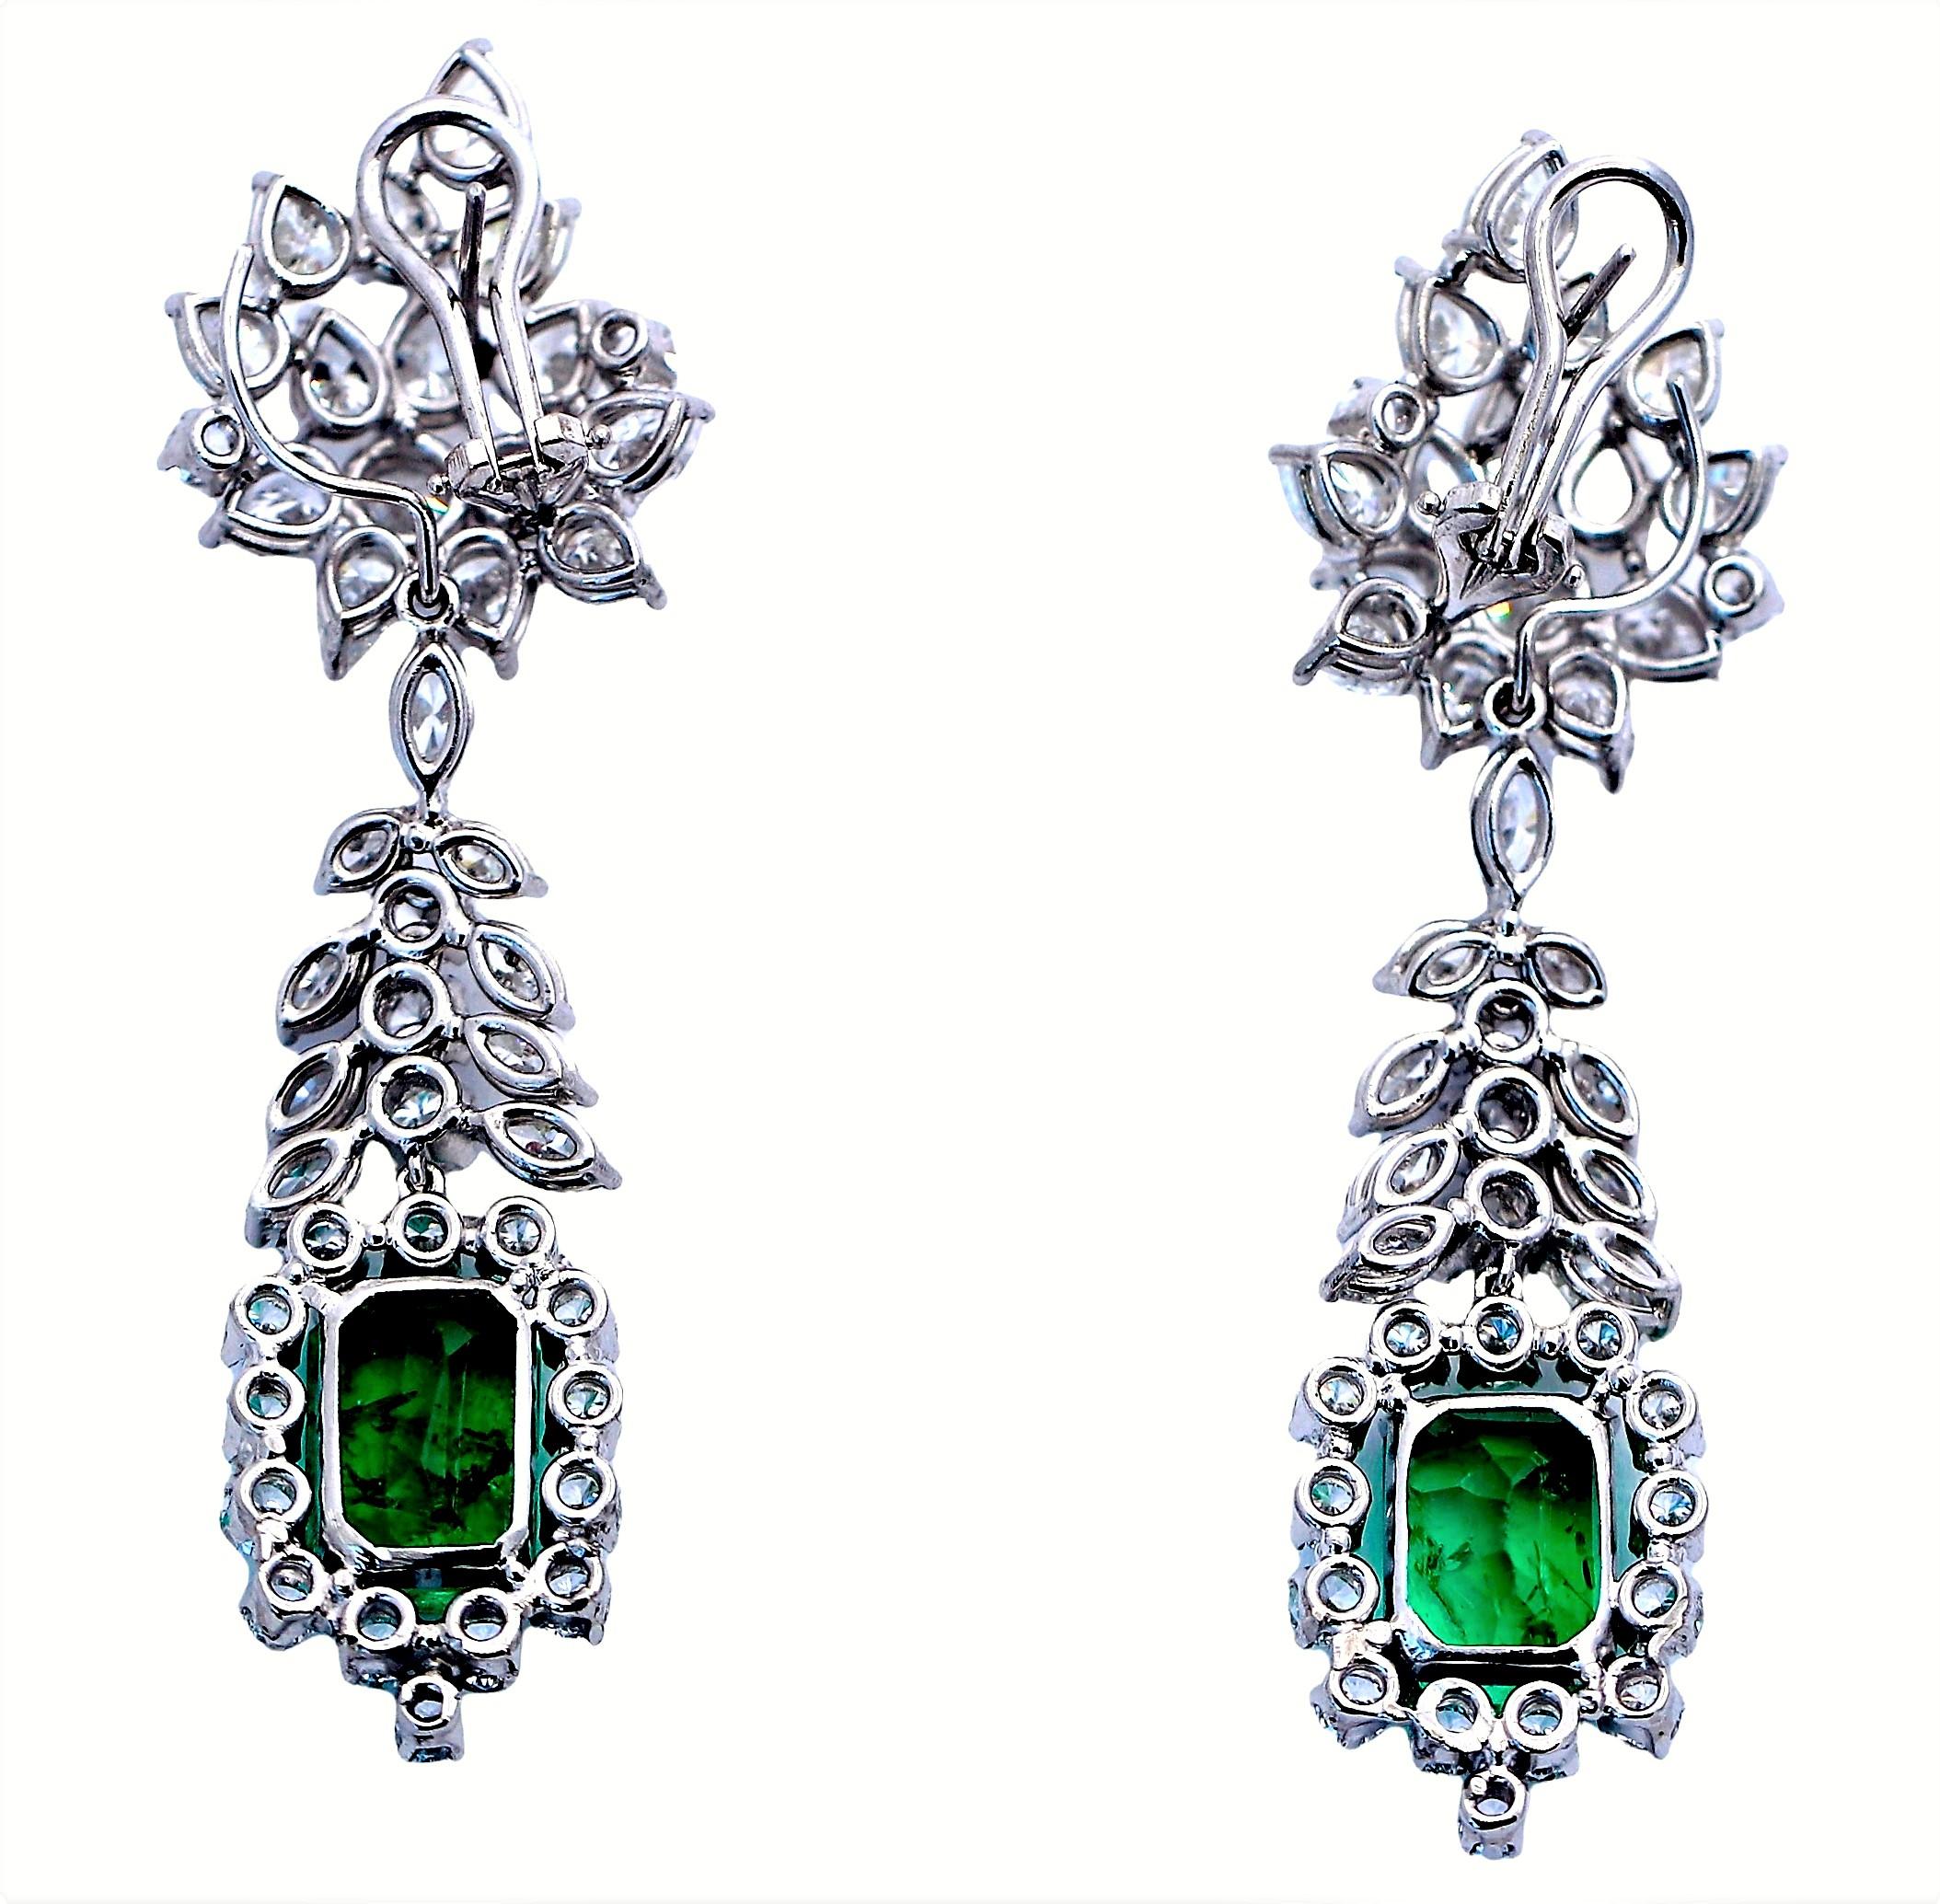 This outstanding pair of handmade, platinum, Mid-20th Century cocktail earrings is set with two Colombian emeralds having a total weight of 8.80ct. The pair of emeralds are vibrant, brilliant, and are exemplary of fine Colombian color. It is